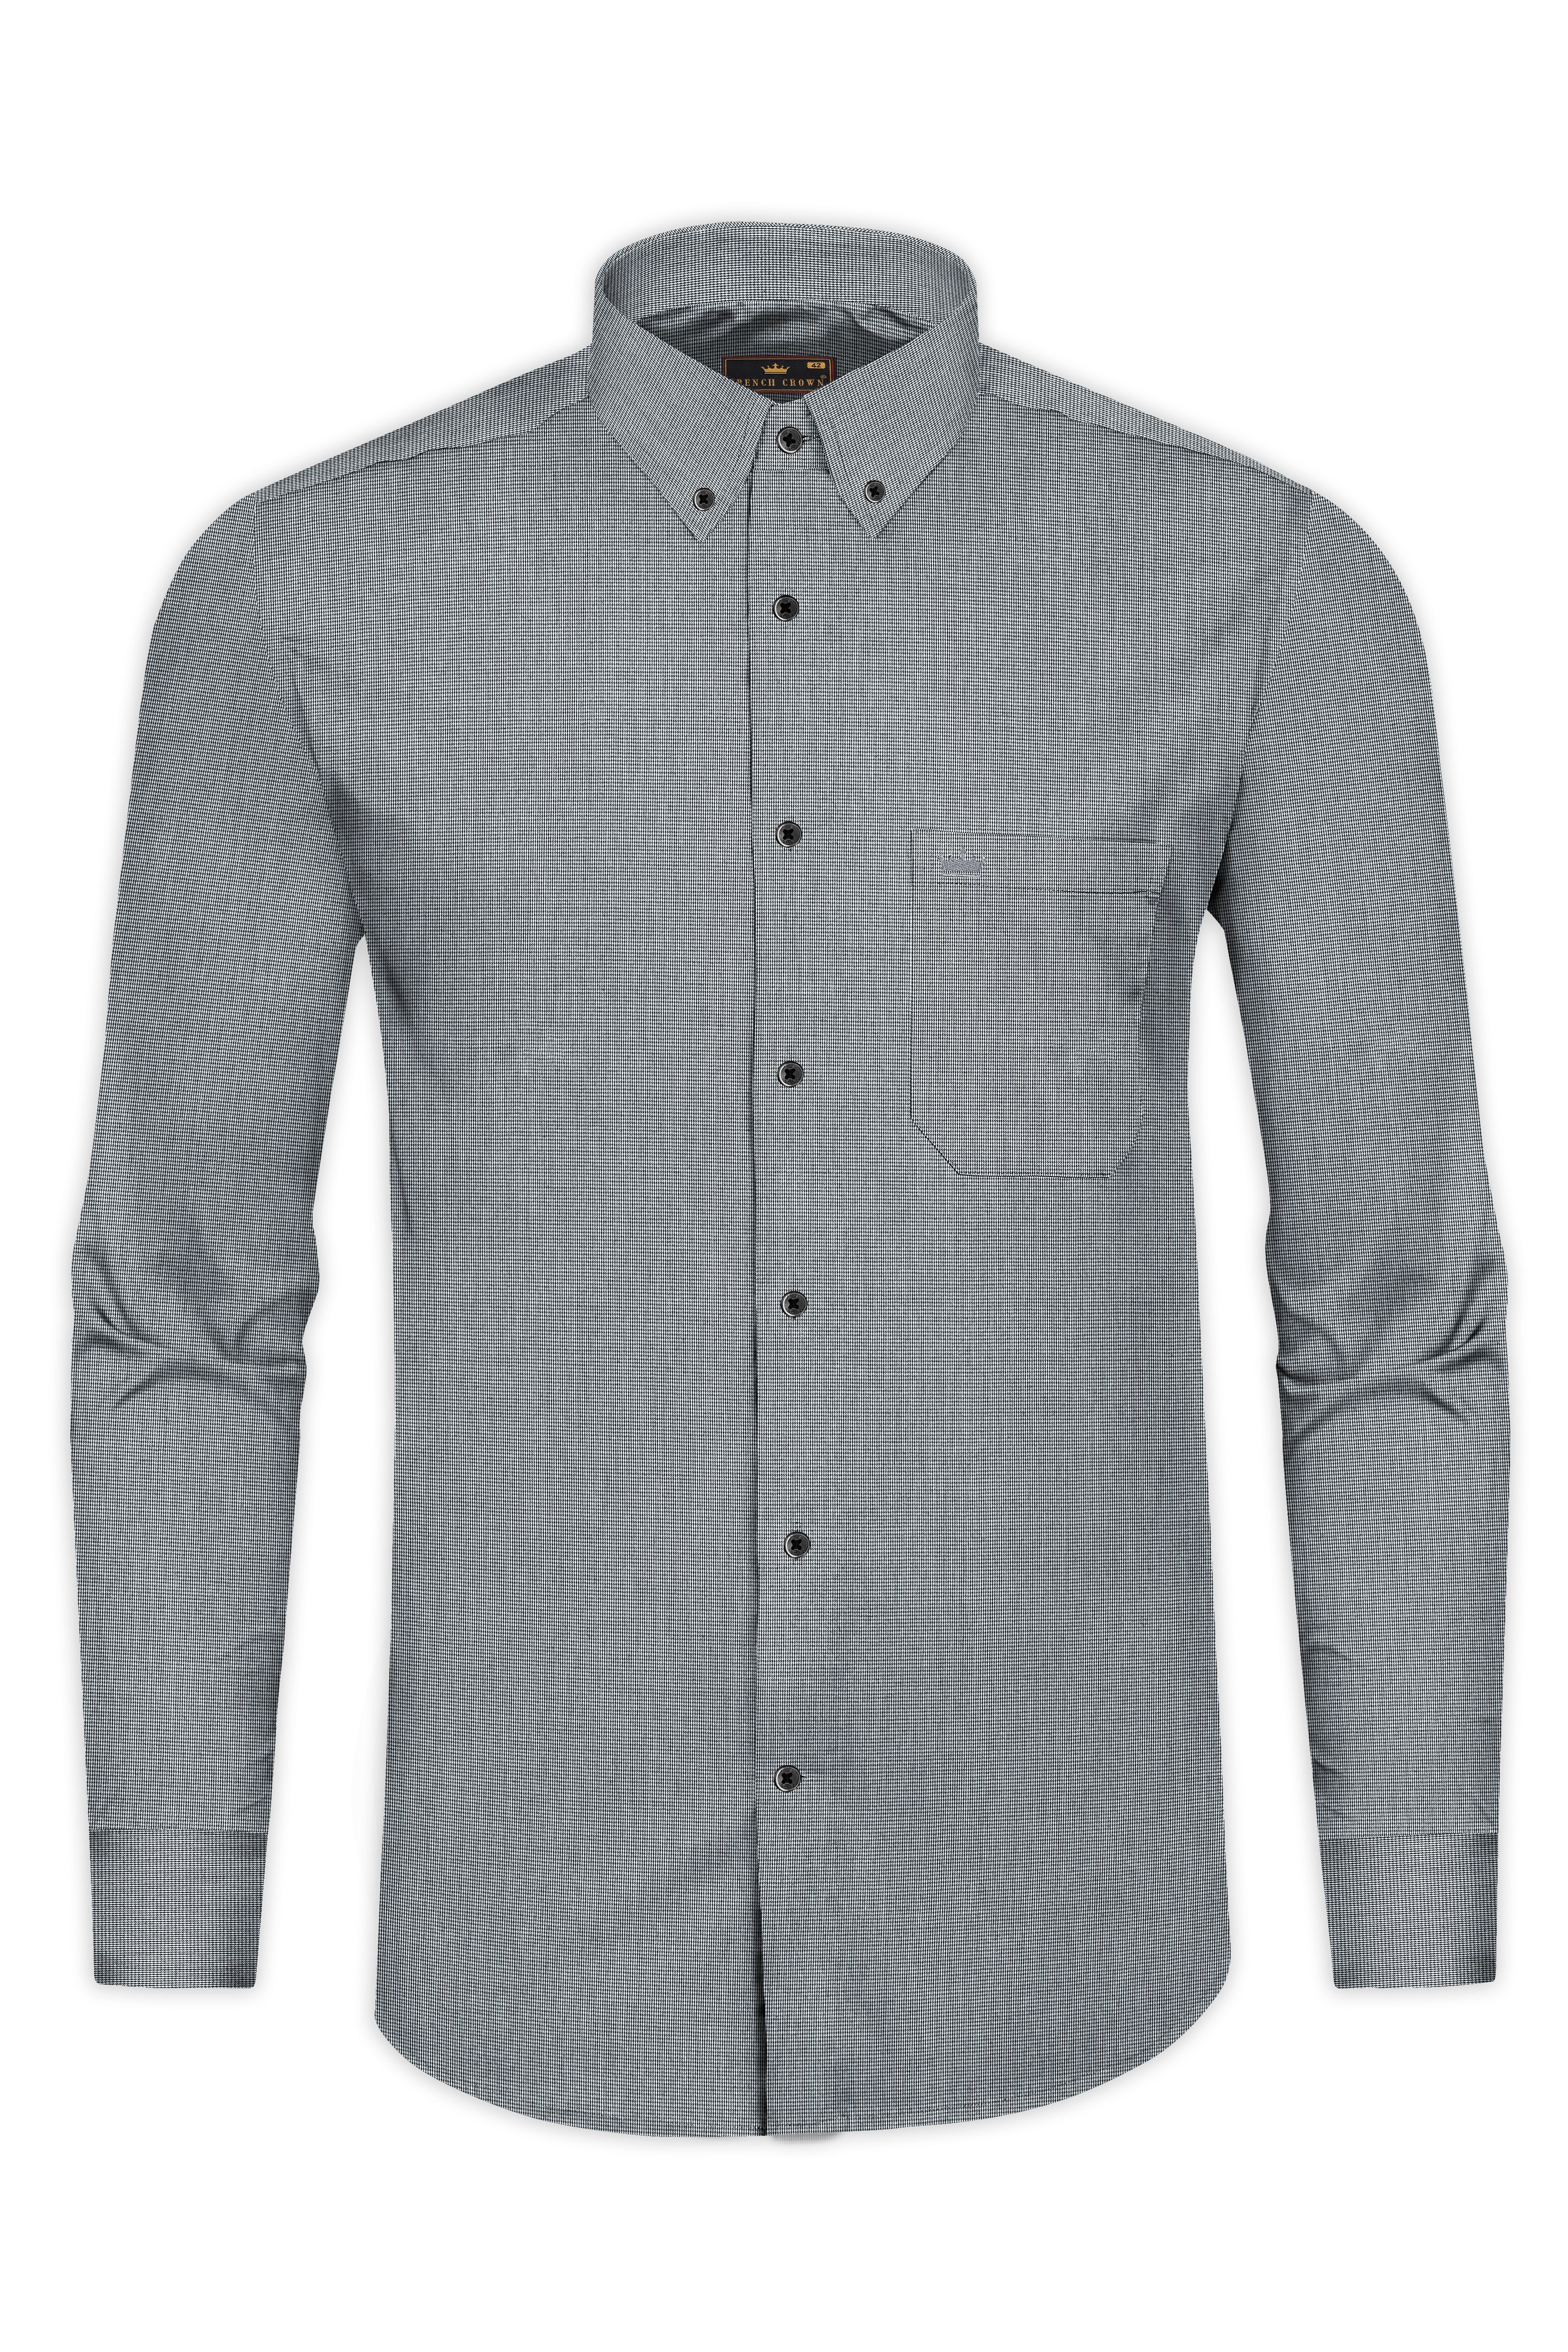 Chatelle Gray Micro Houndstooth Heavyweight Shirt